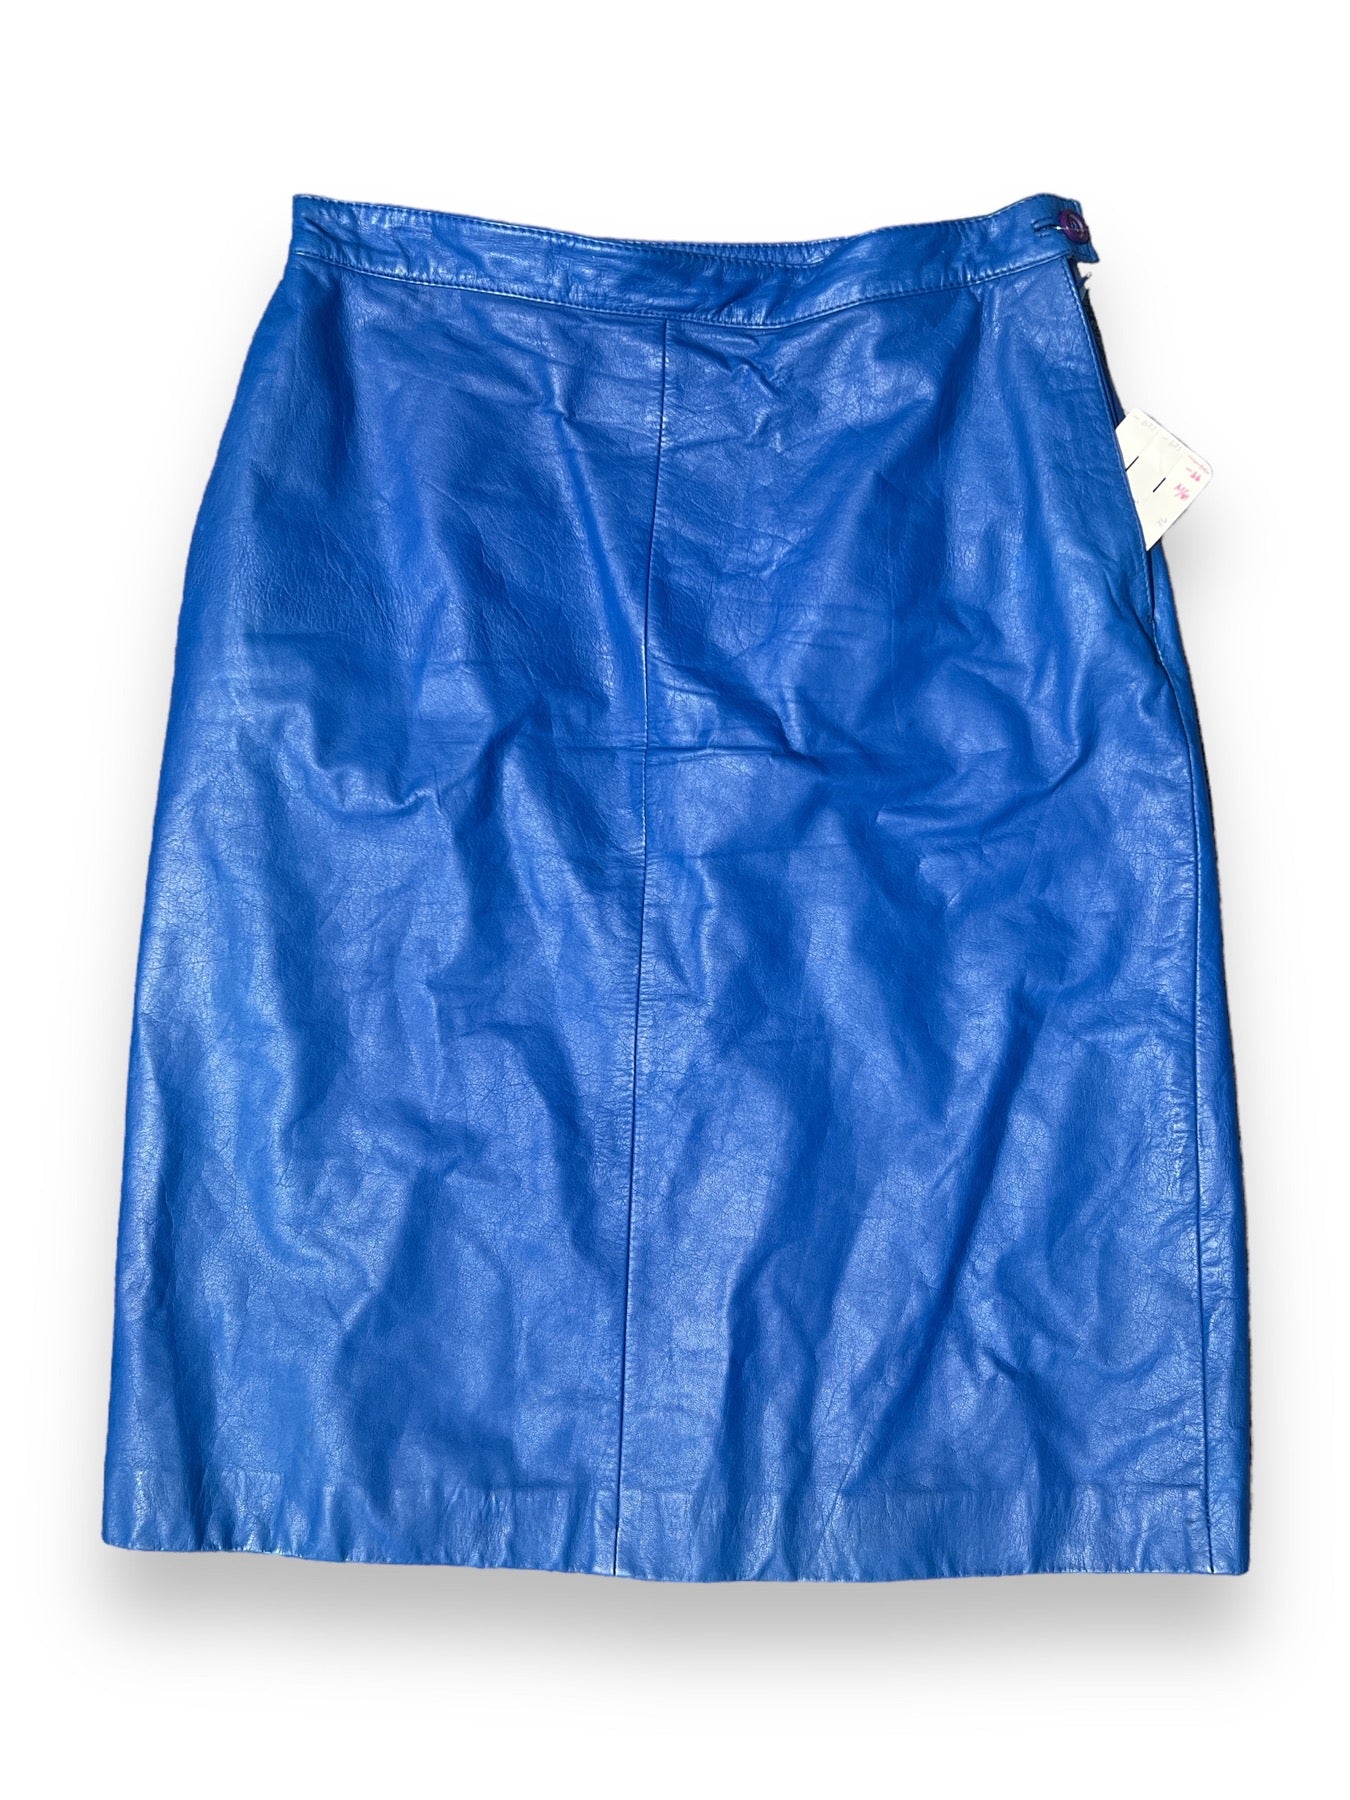 CHARLY’S LEATHER COBALT SKIRT